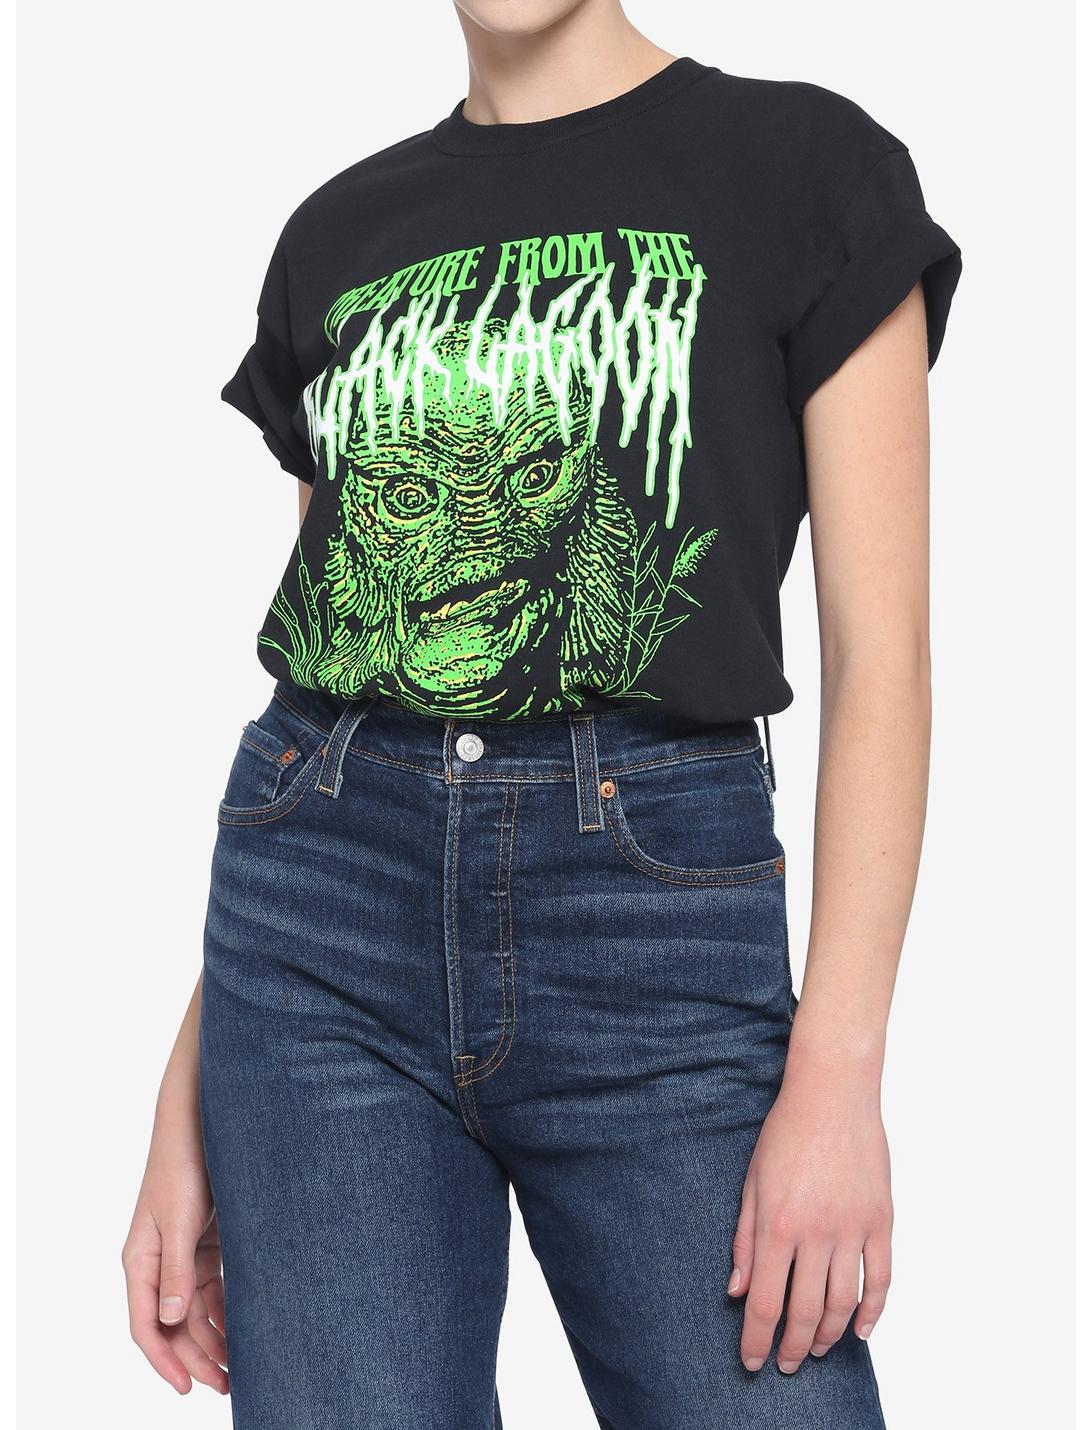 Universal Monsters Creature From The Black Lagoon 1993 Tour Girls Boyfriend Fit T-Shirt, MULTI, hi-res